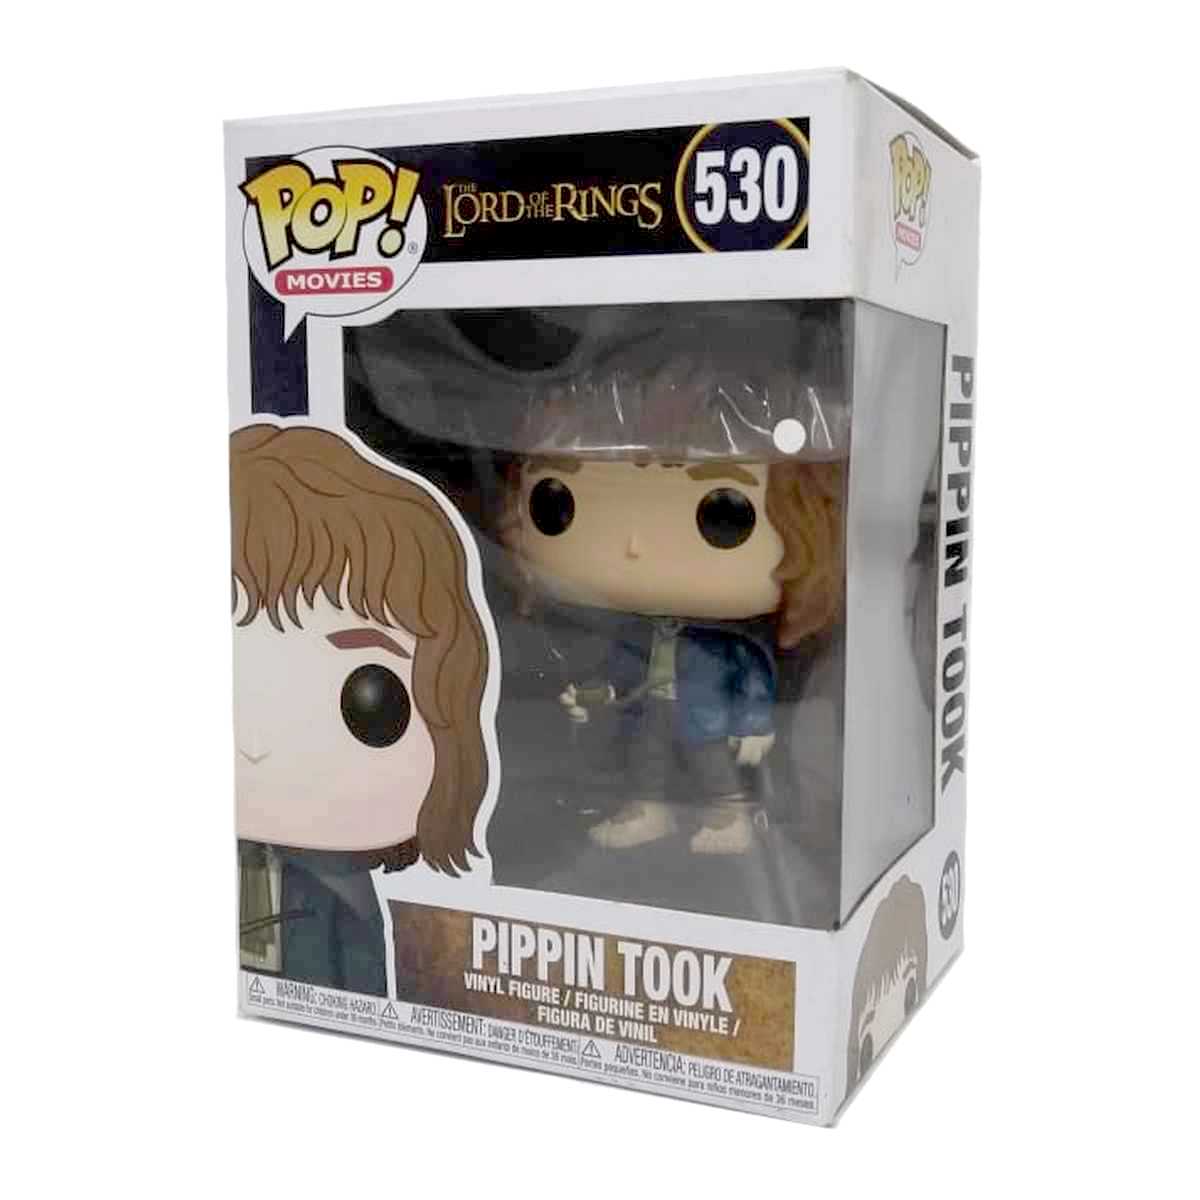 Funko Pop O Senhor dos Anéis The Lord of The Rings Pippin Took figure número 530 Vaulted